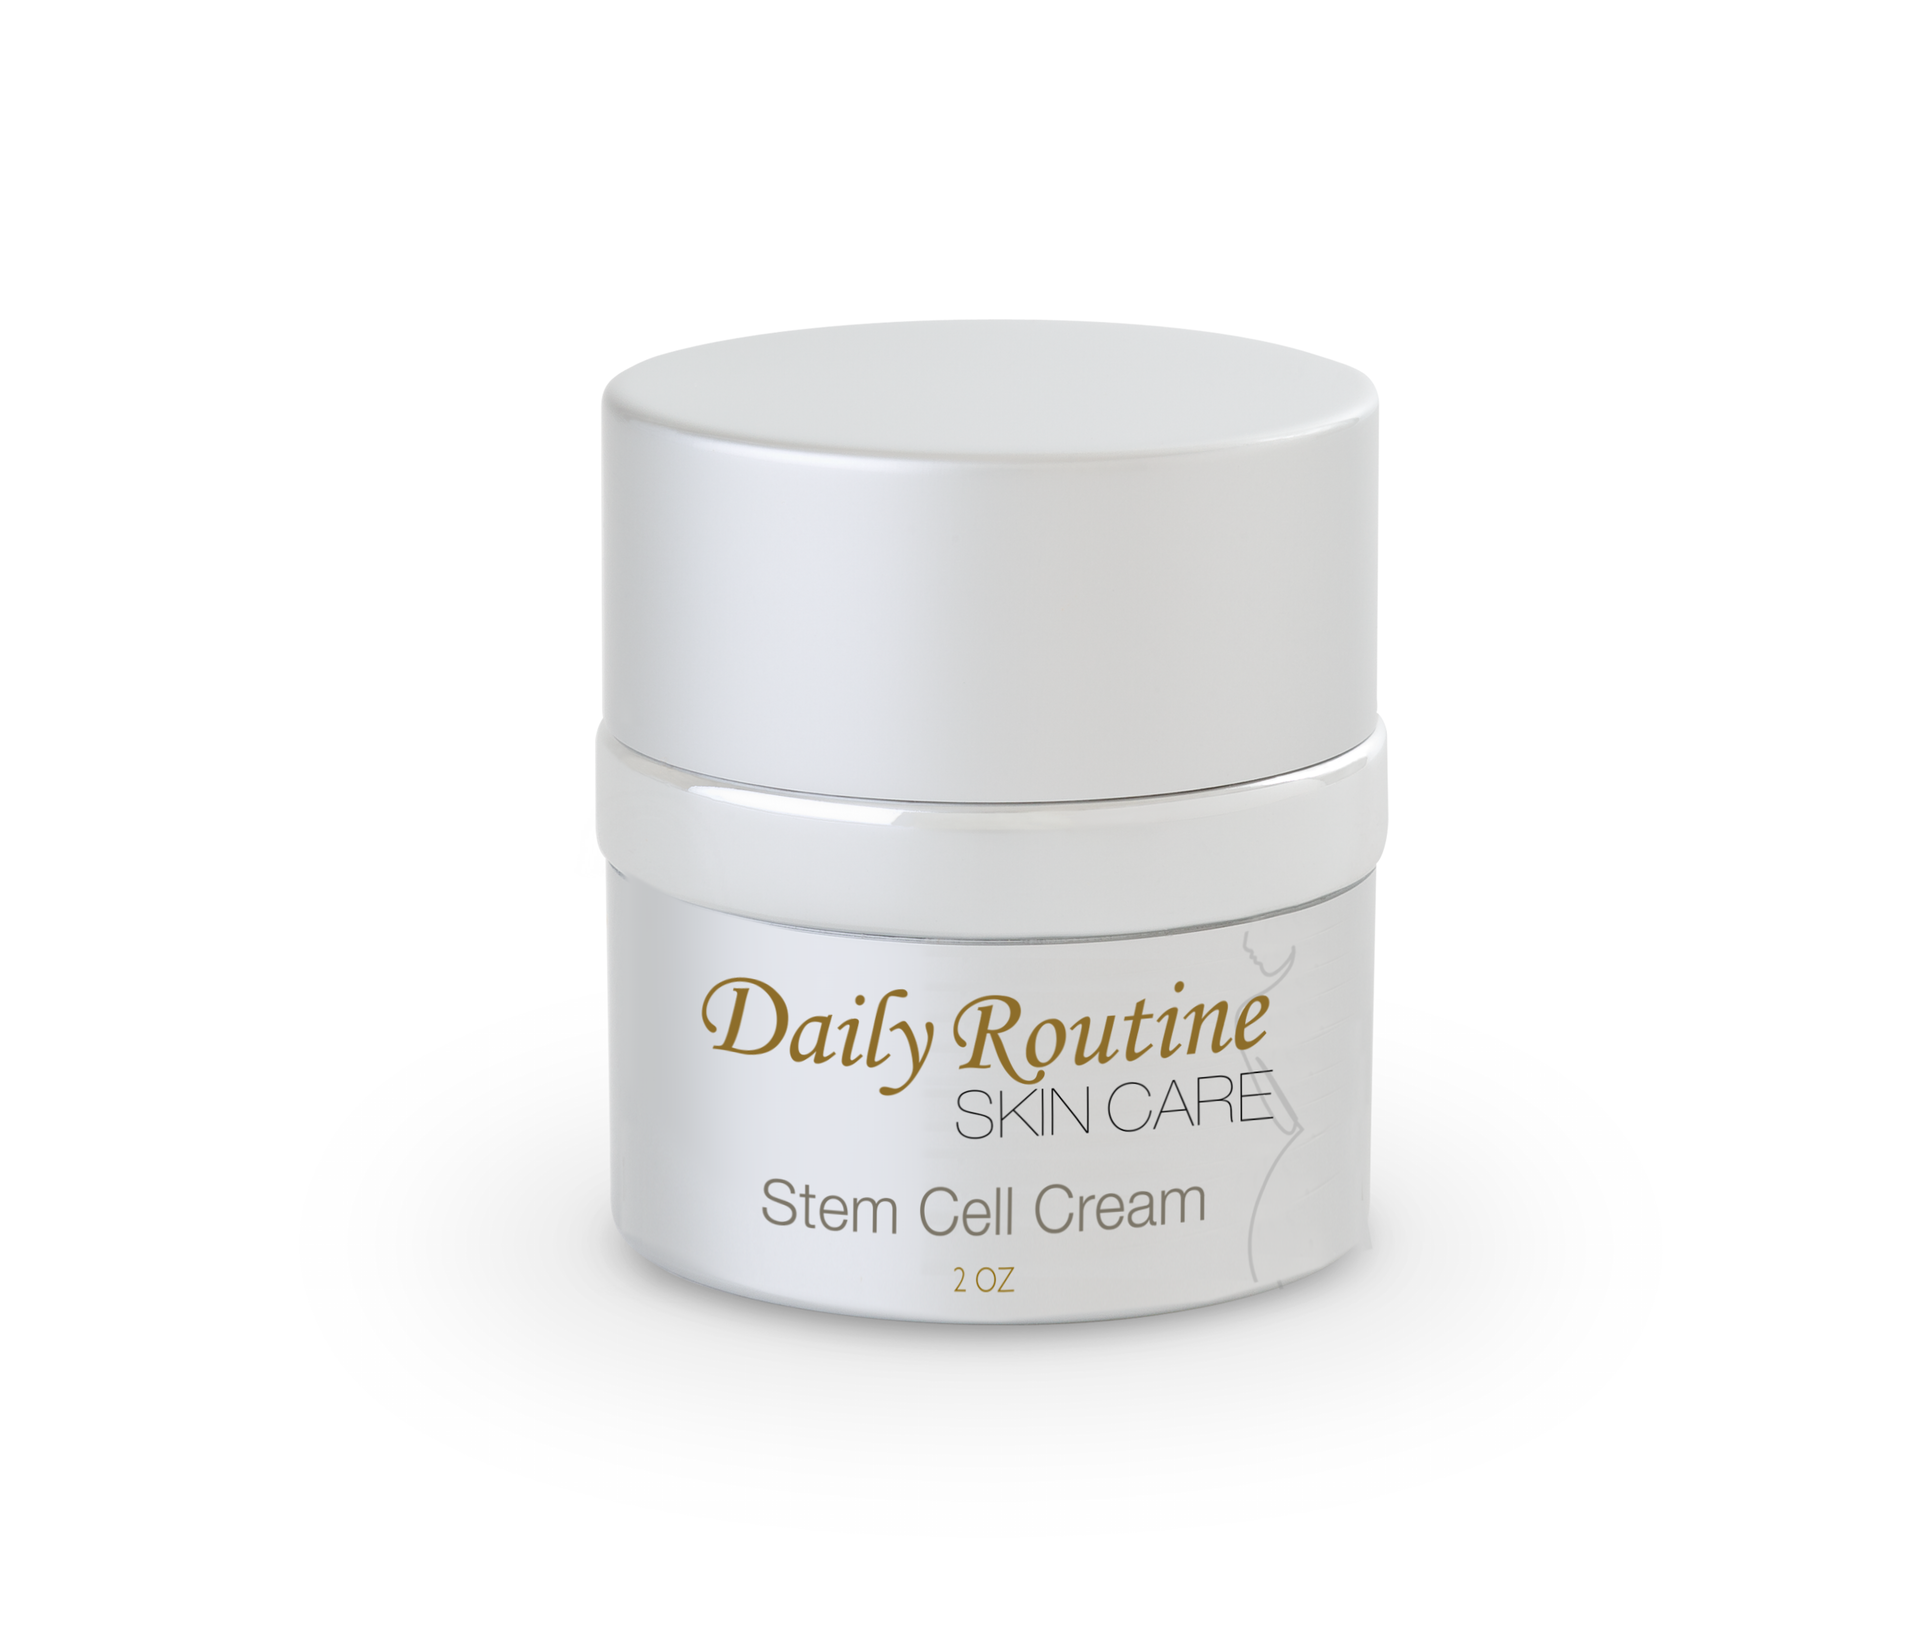 jar of stem cell cream by Daily Routine Skin Care